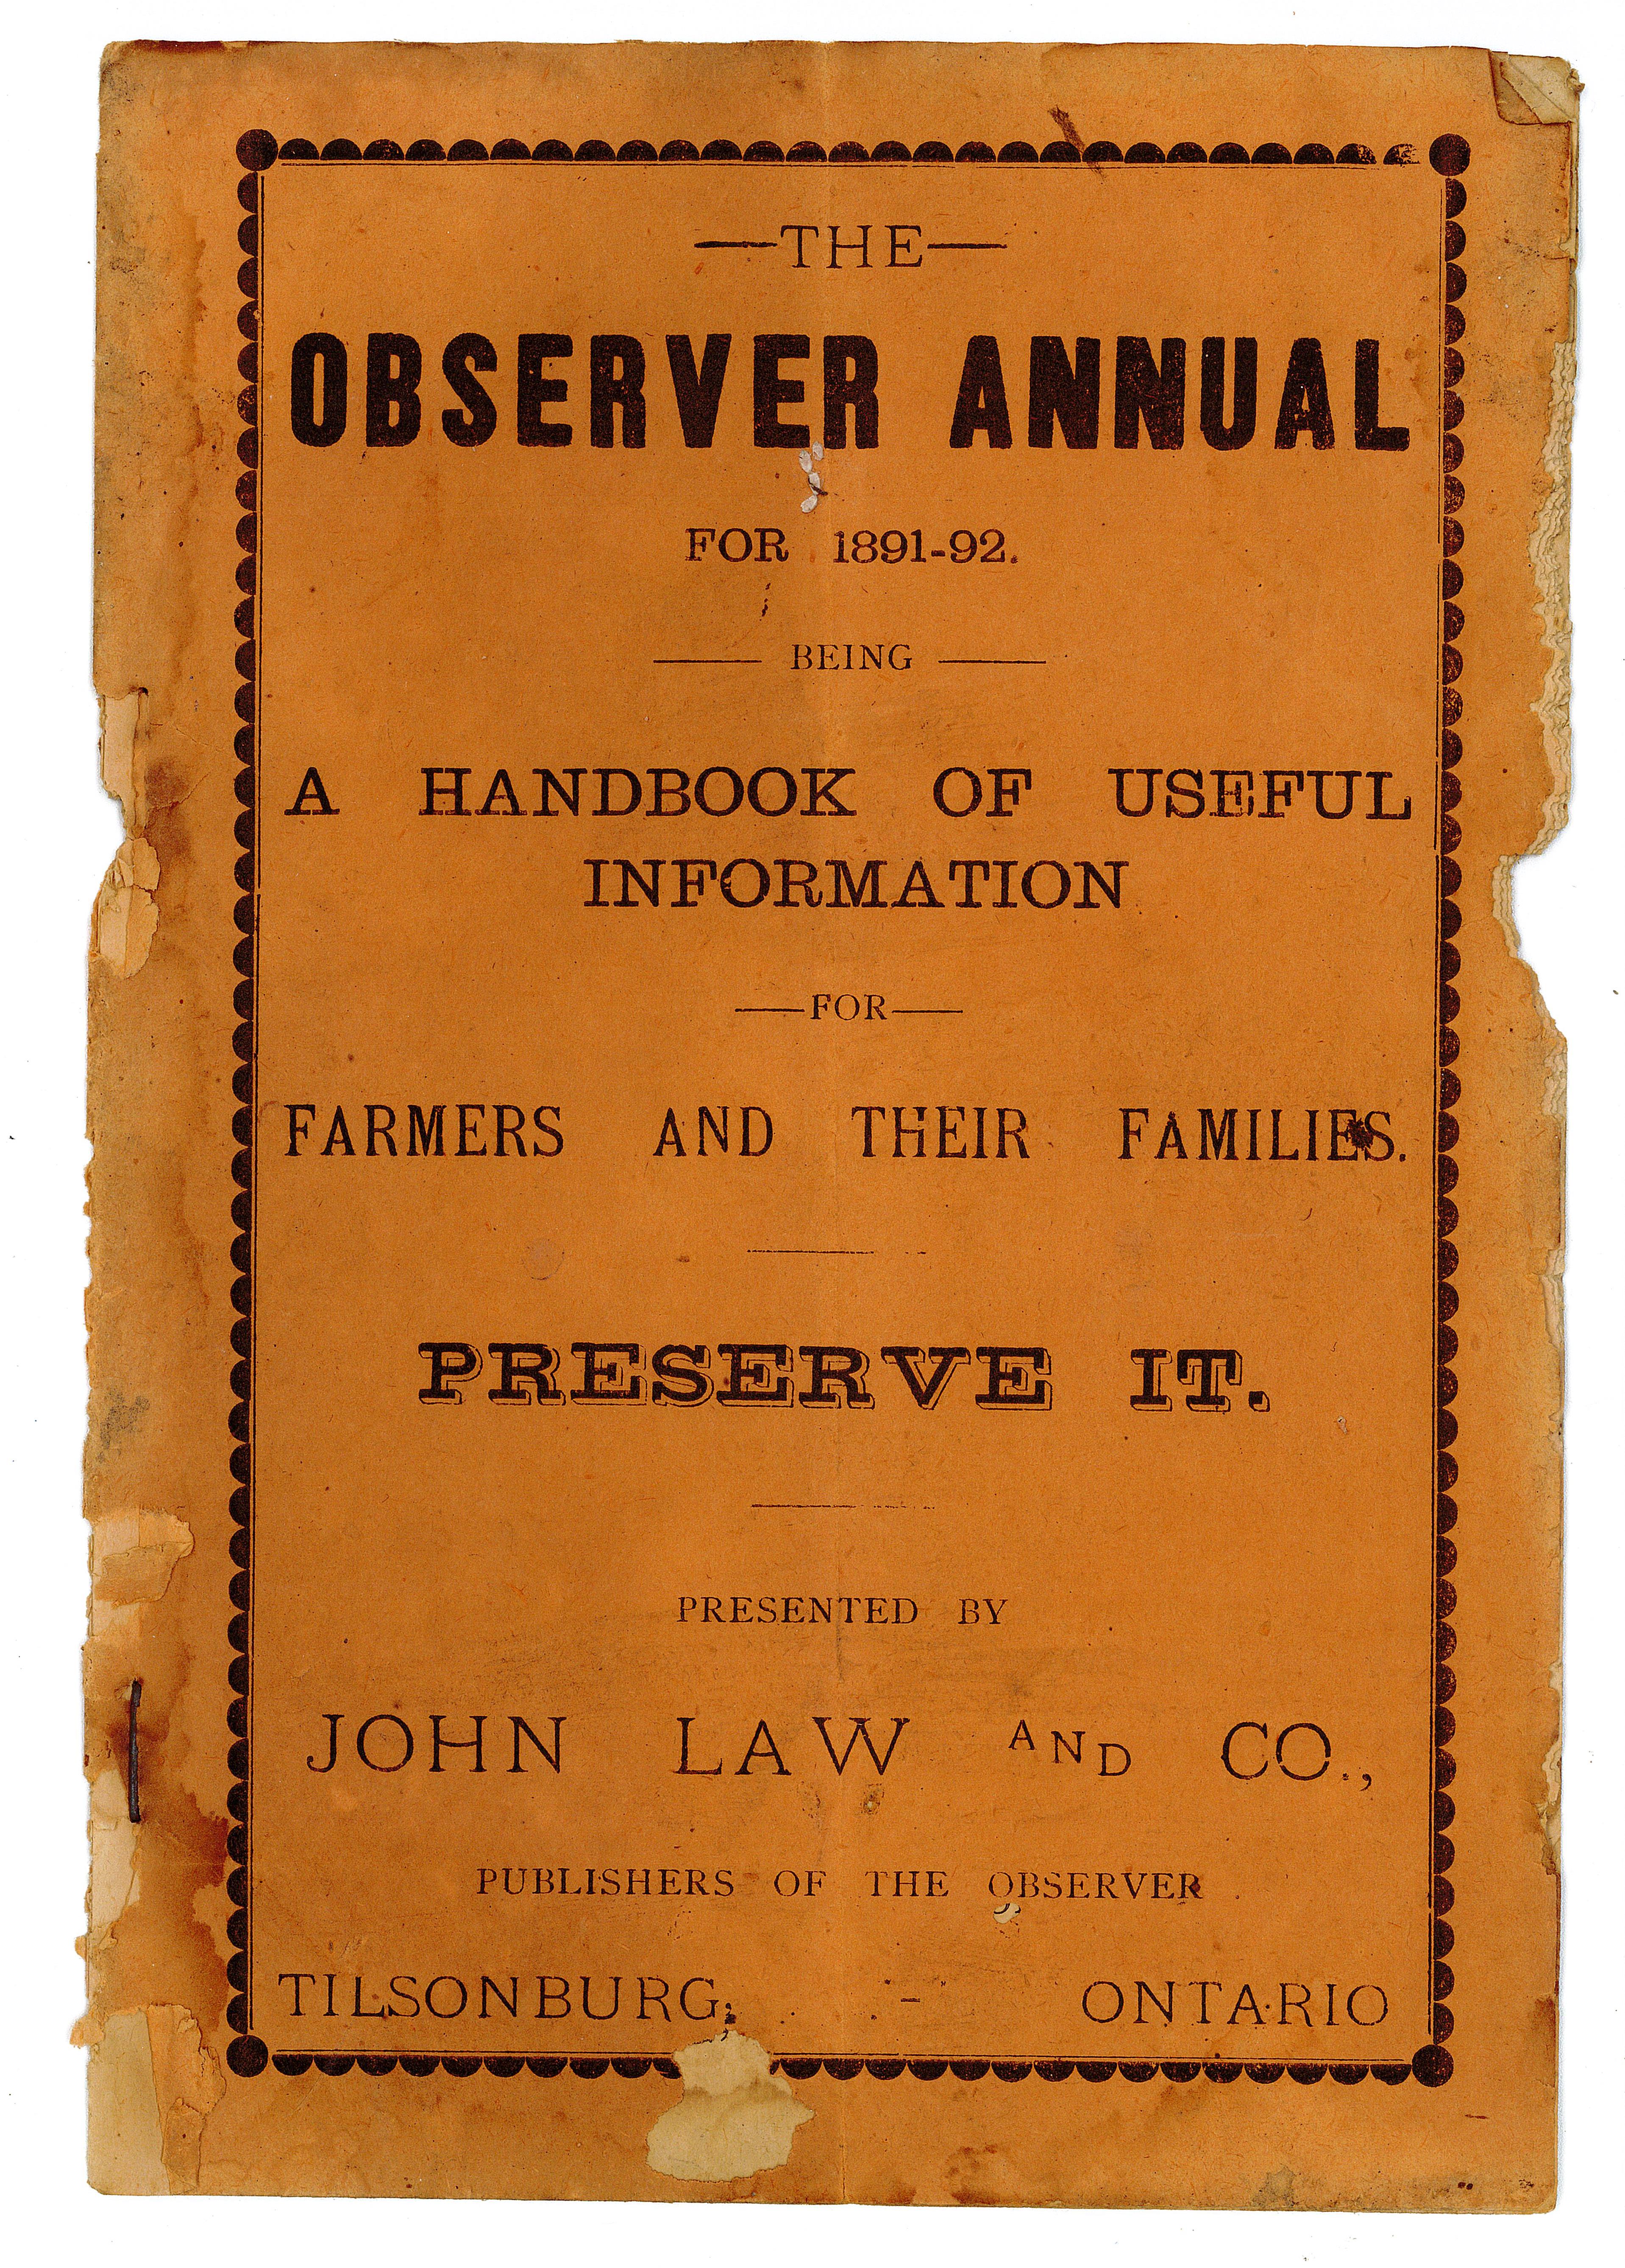 The Observer Annual for 1891-92, handbook of useful information. Printed on orange paper. 